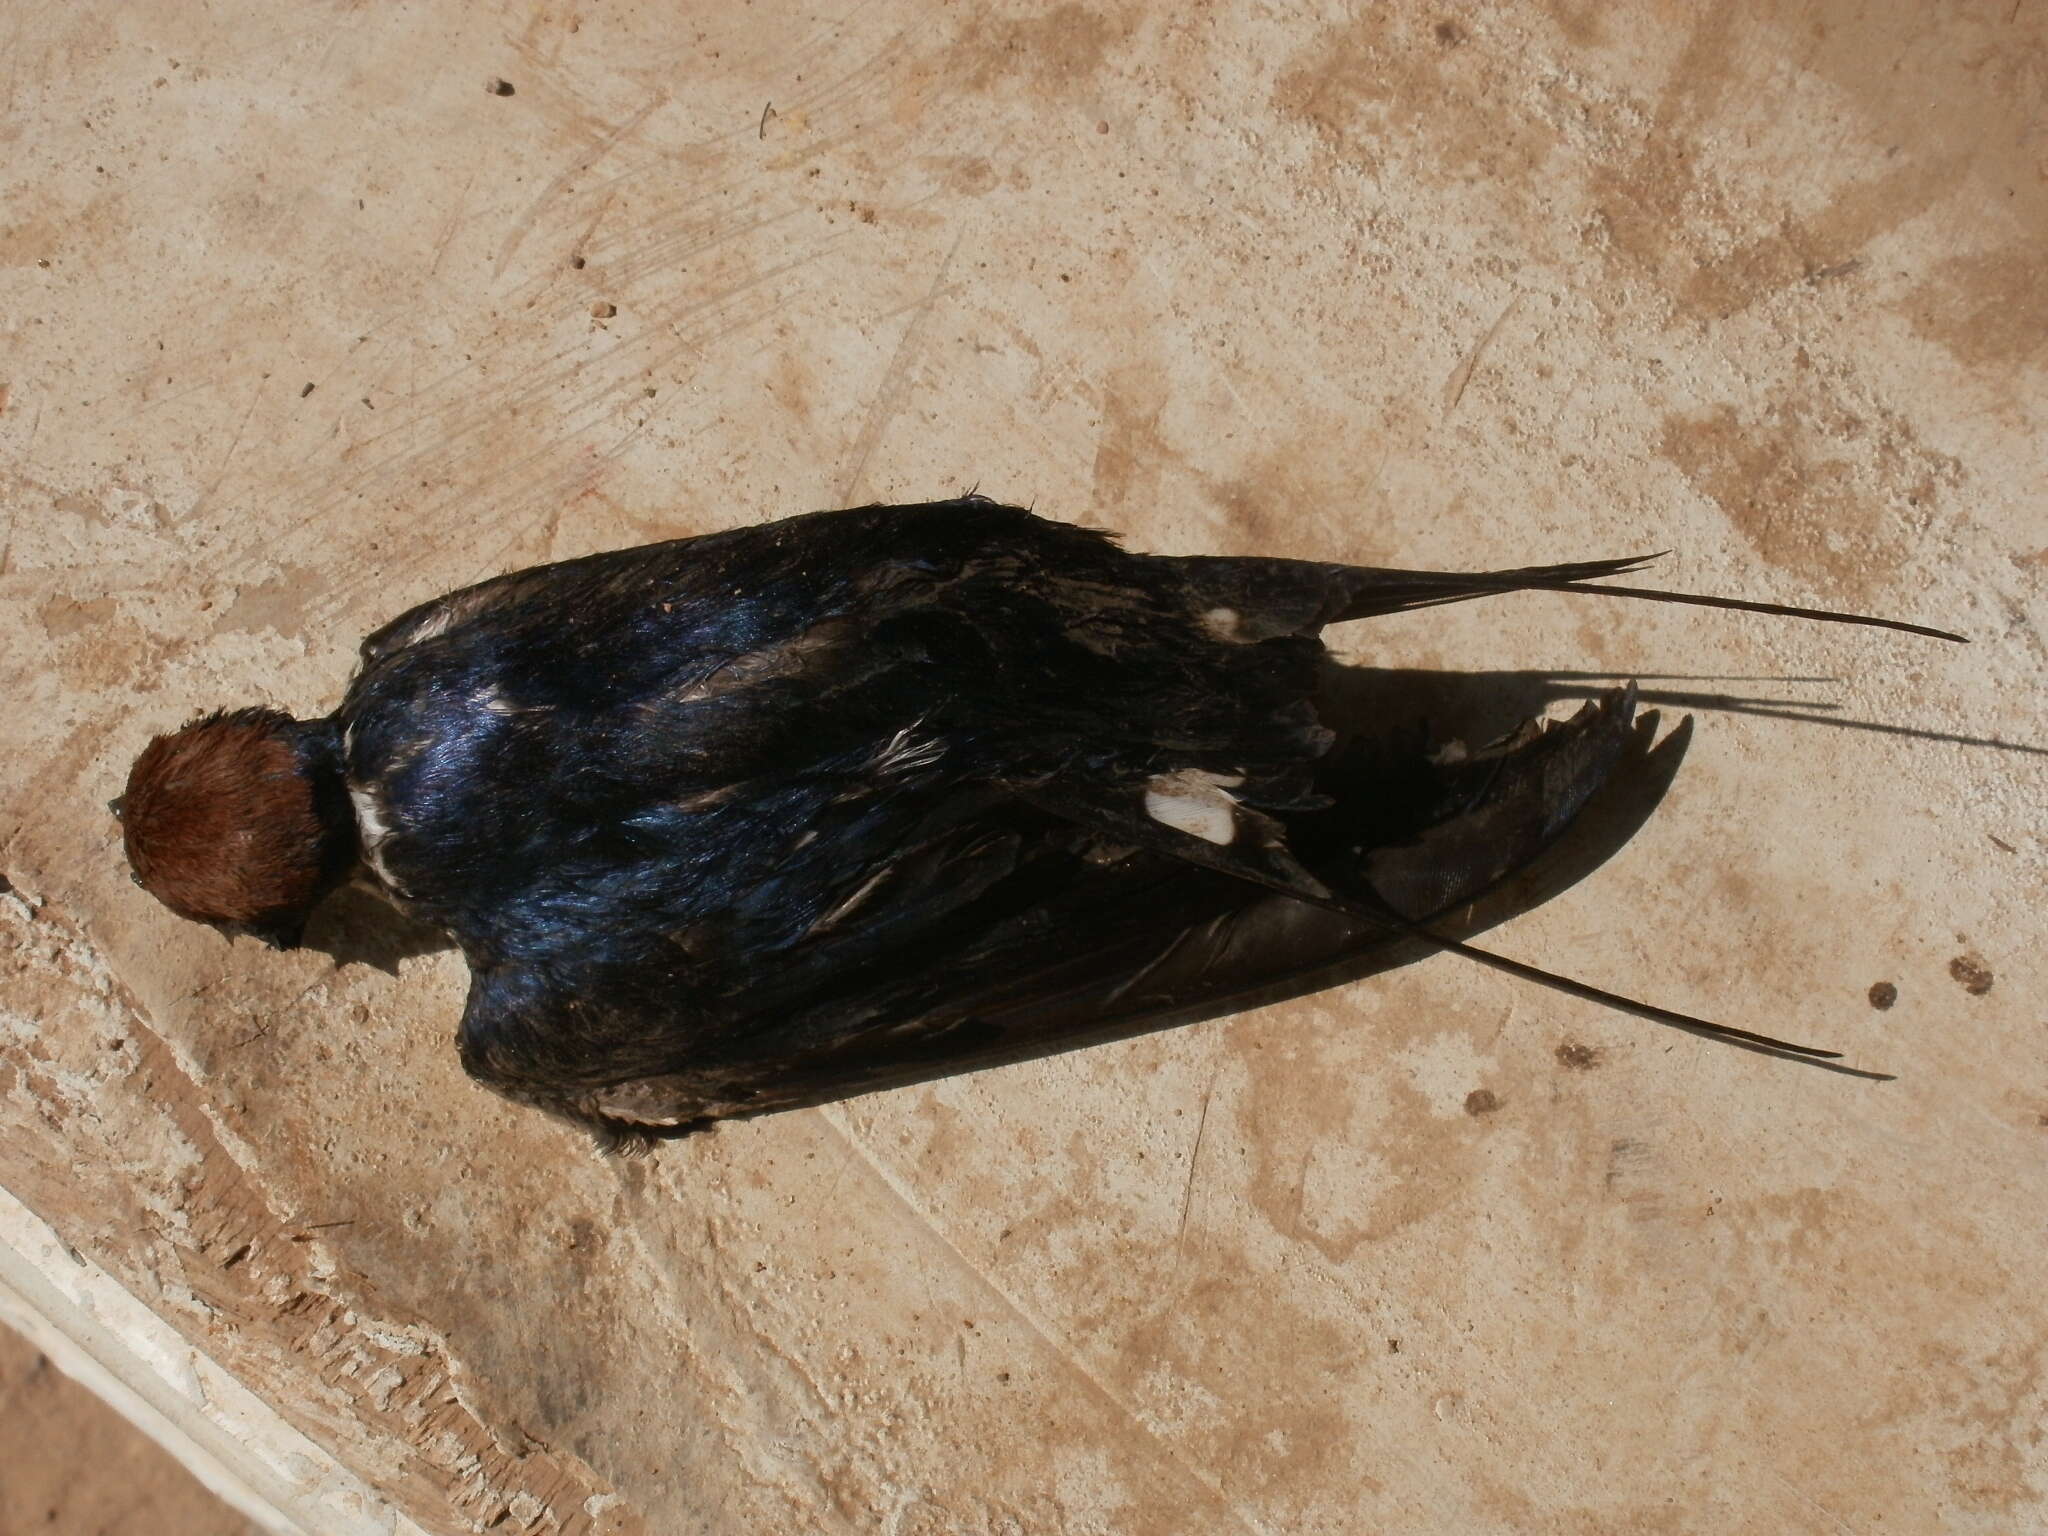 Image of Wire-tailed Swallow